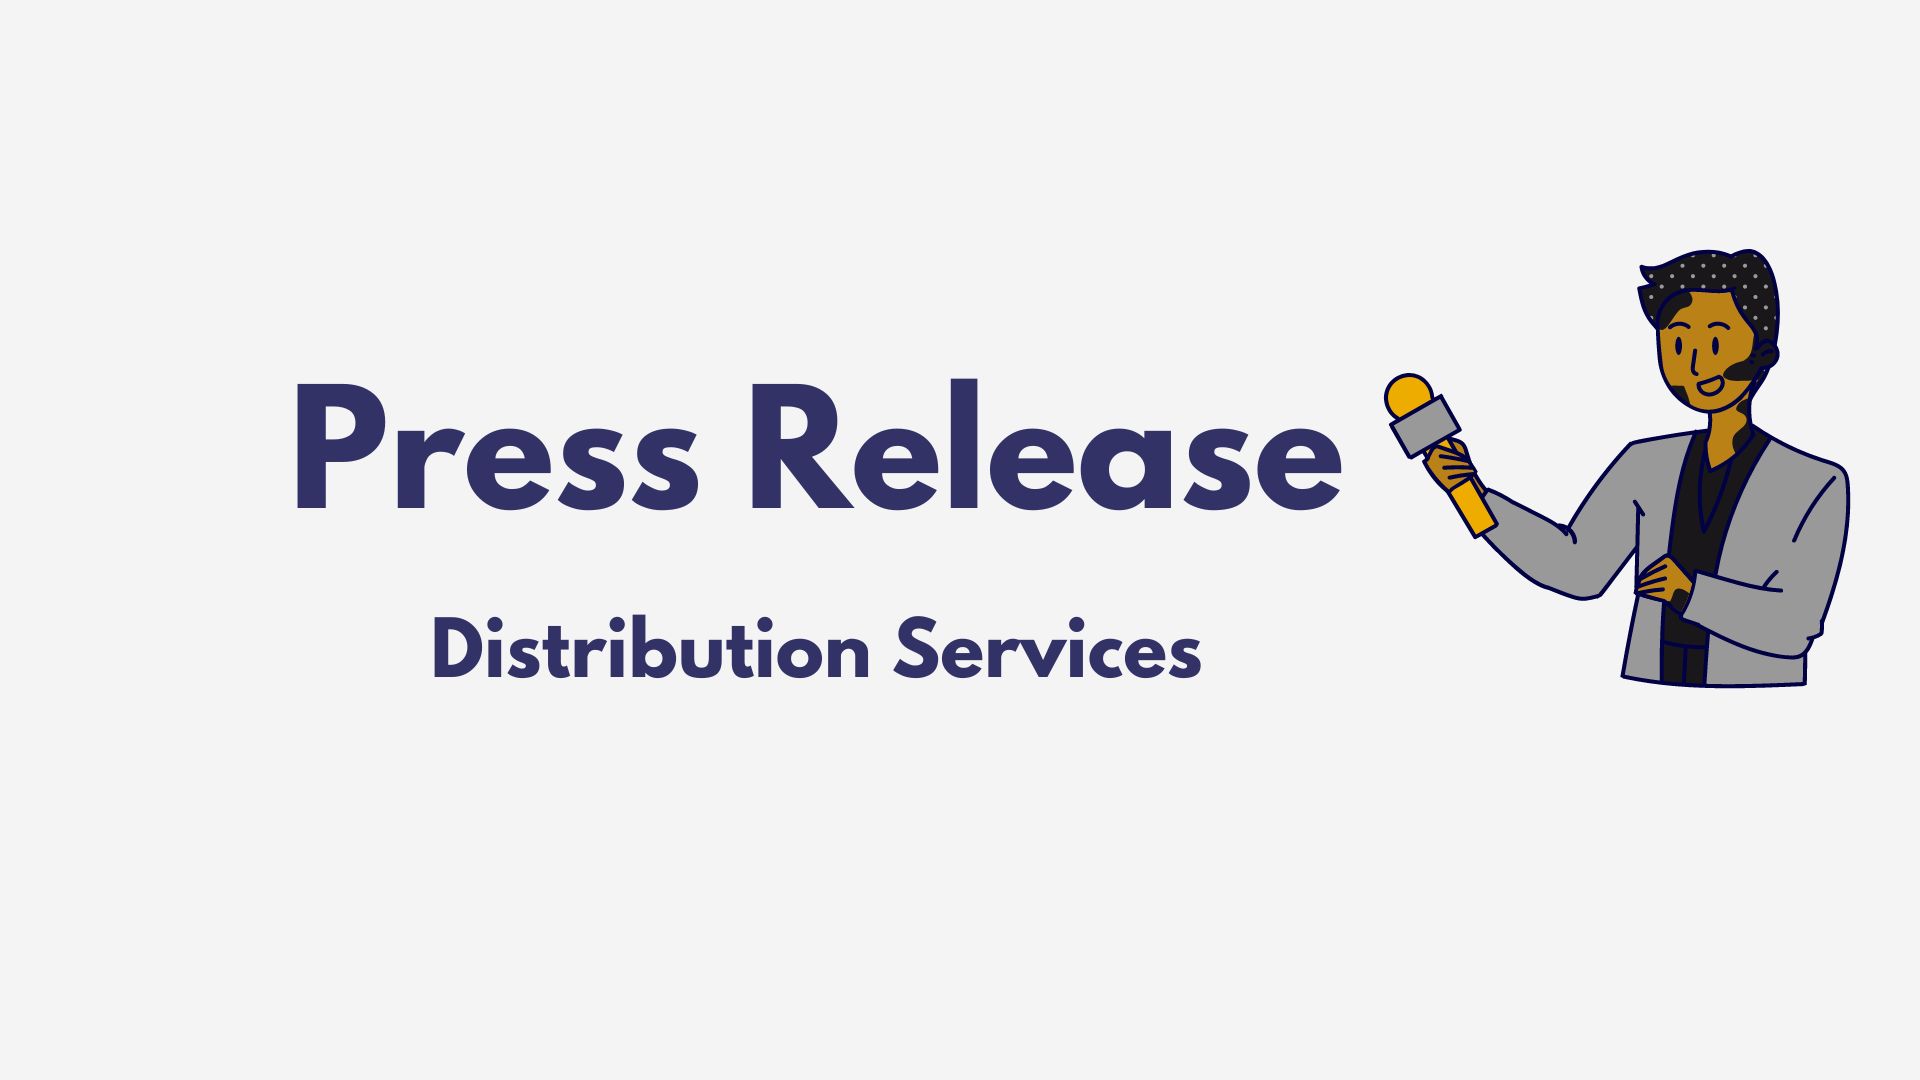 8 best sites to publish press release in Kenya for distribution